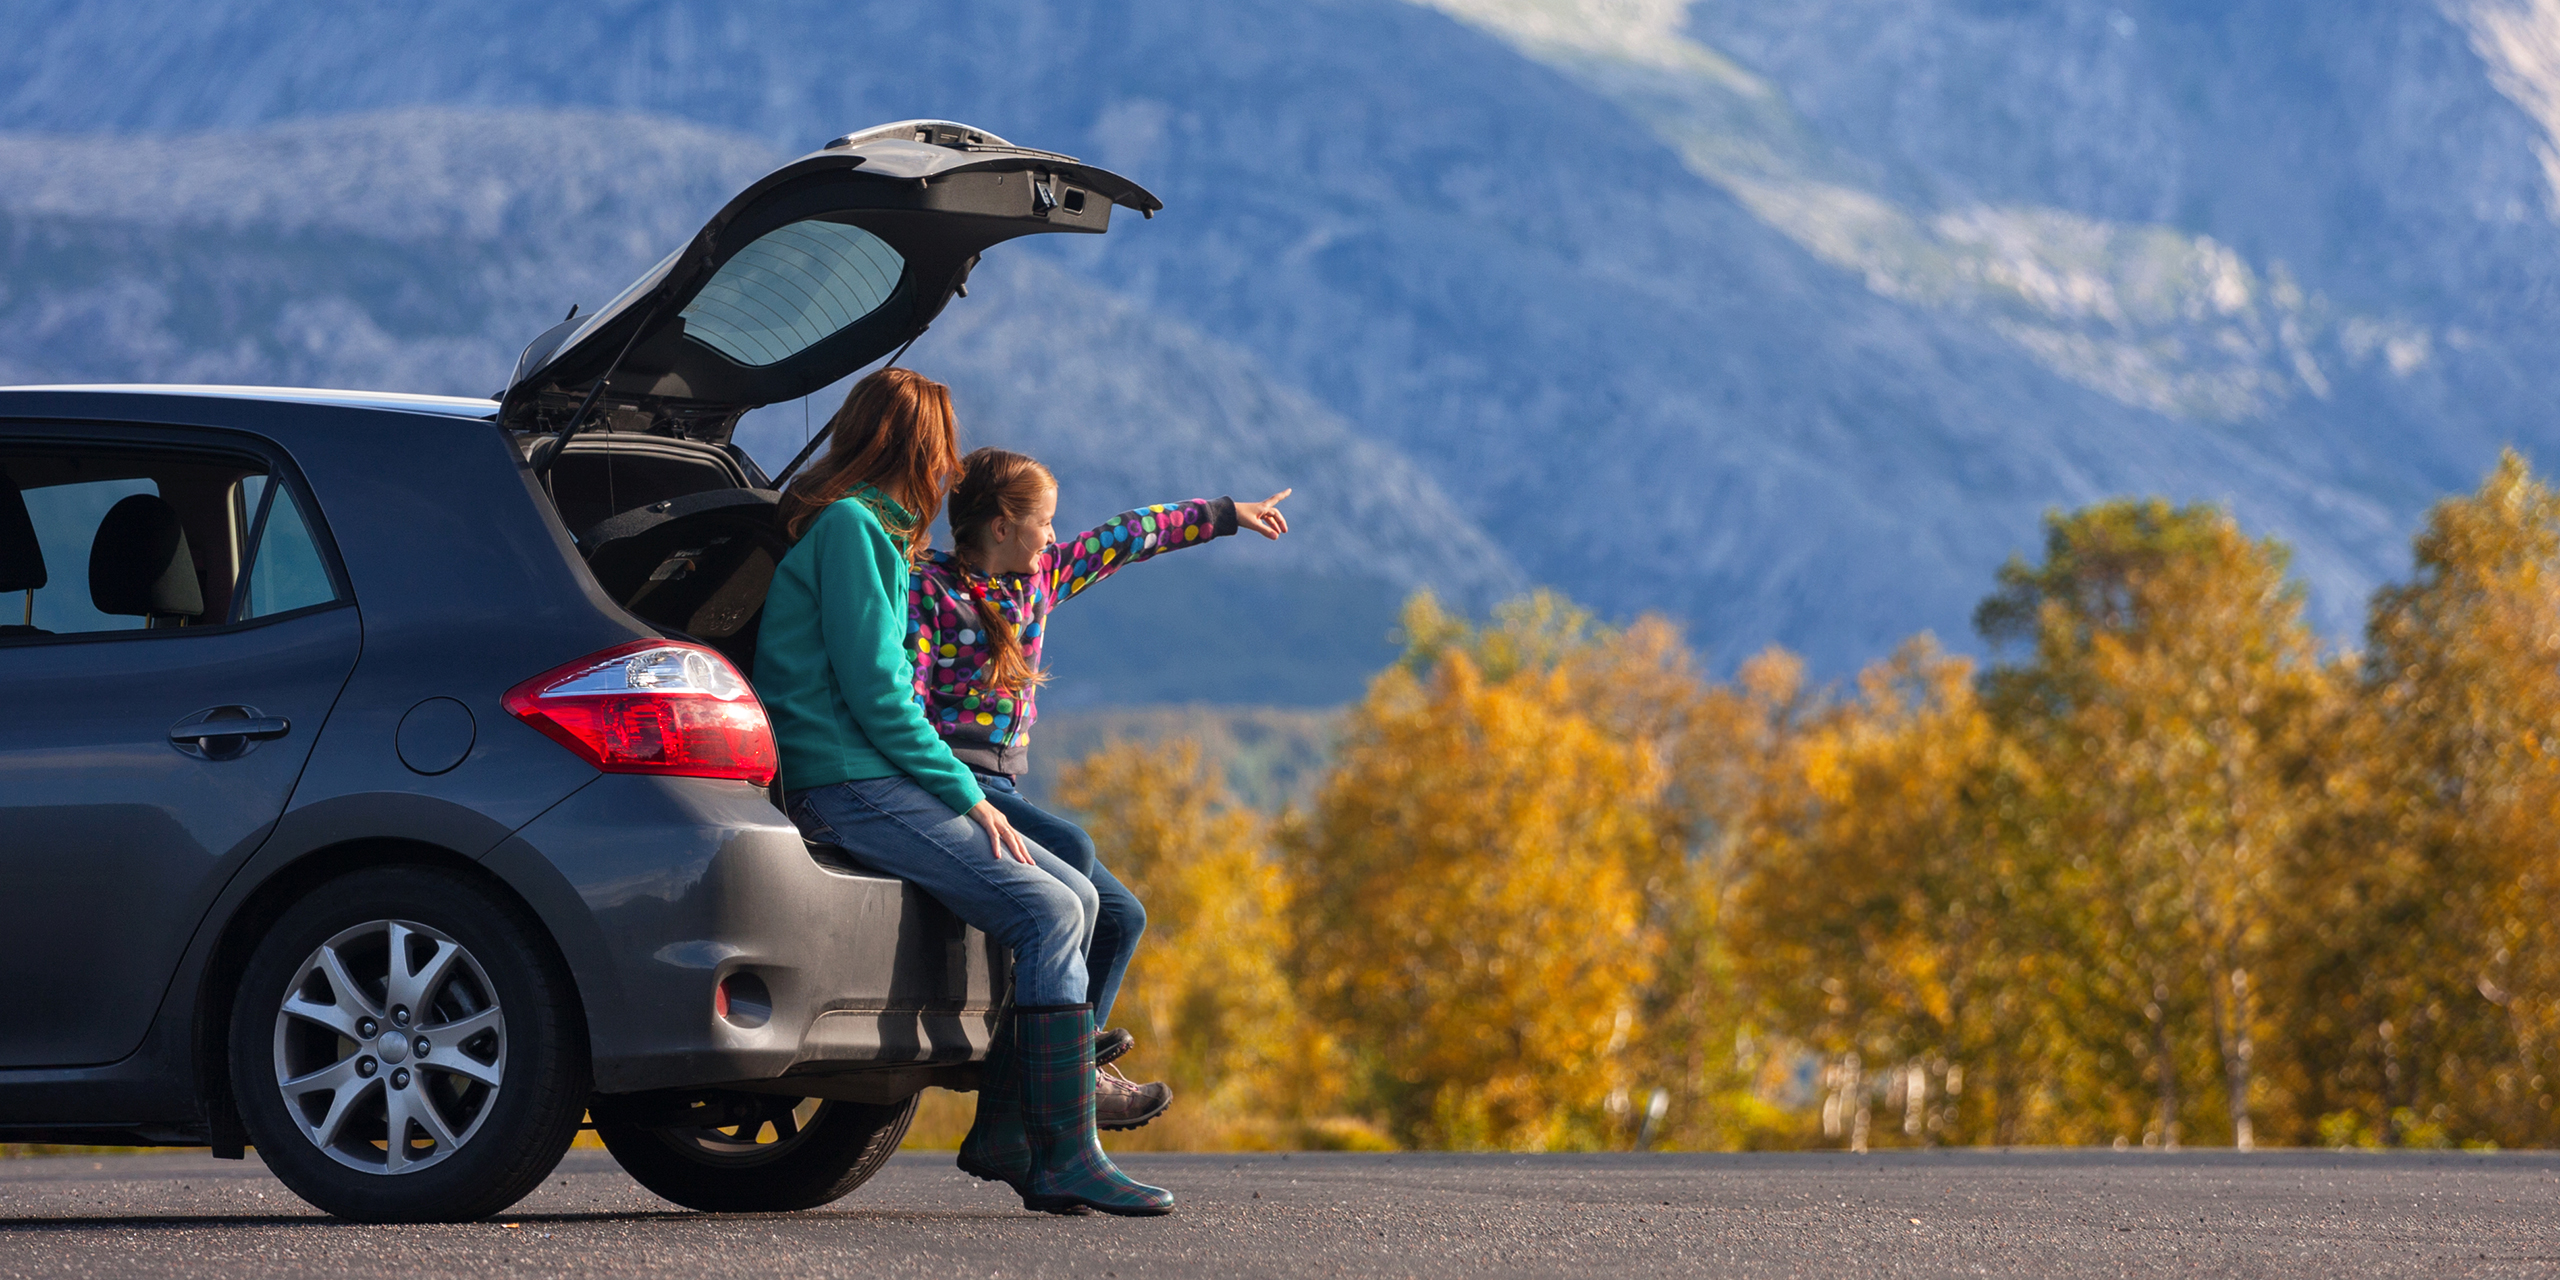 Mother and Daughter in SUV in Mountains; Courtesy of Mostovyi Sergii Igorevich/Shutterstock.com